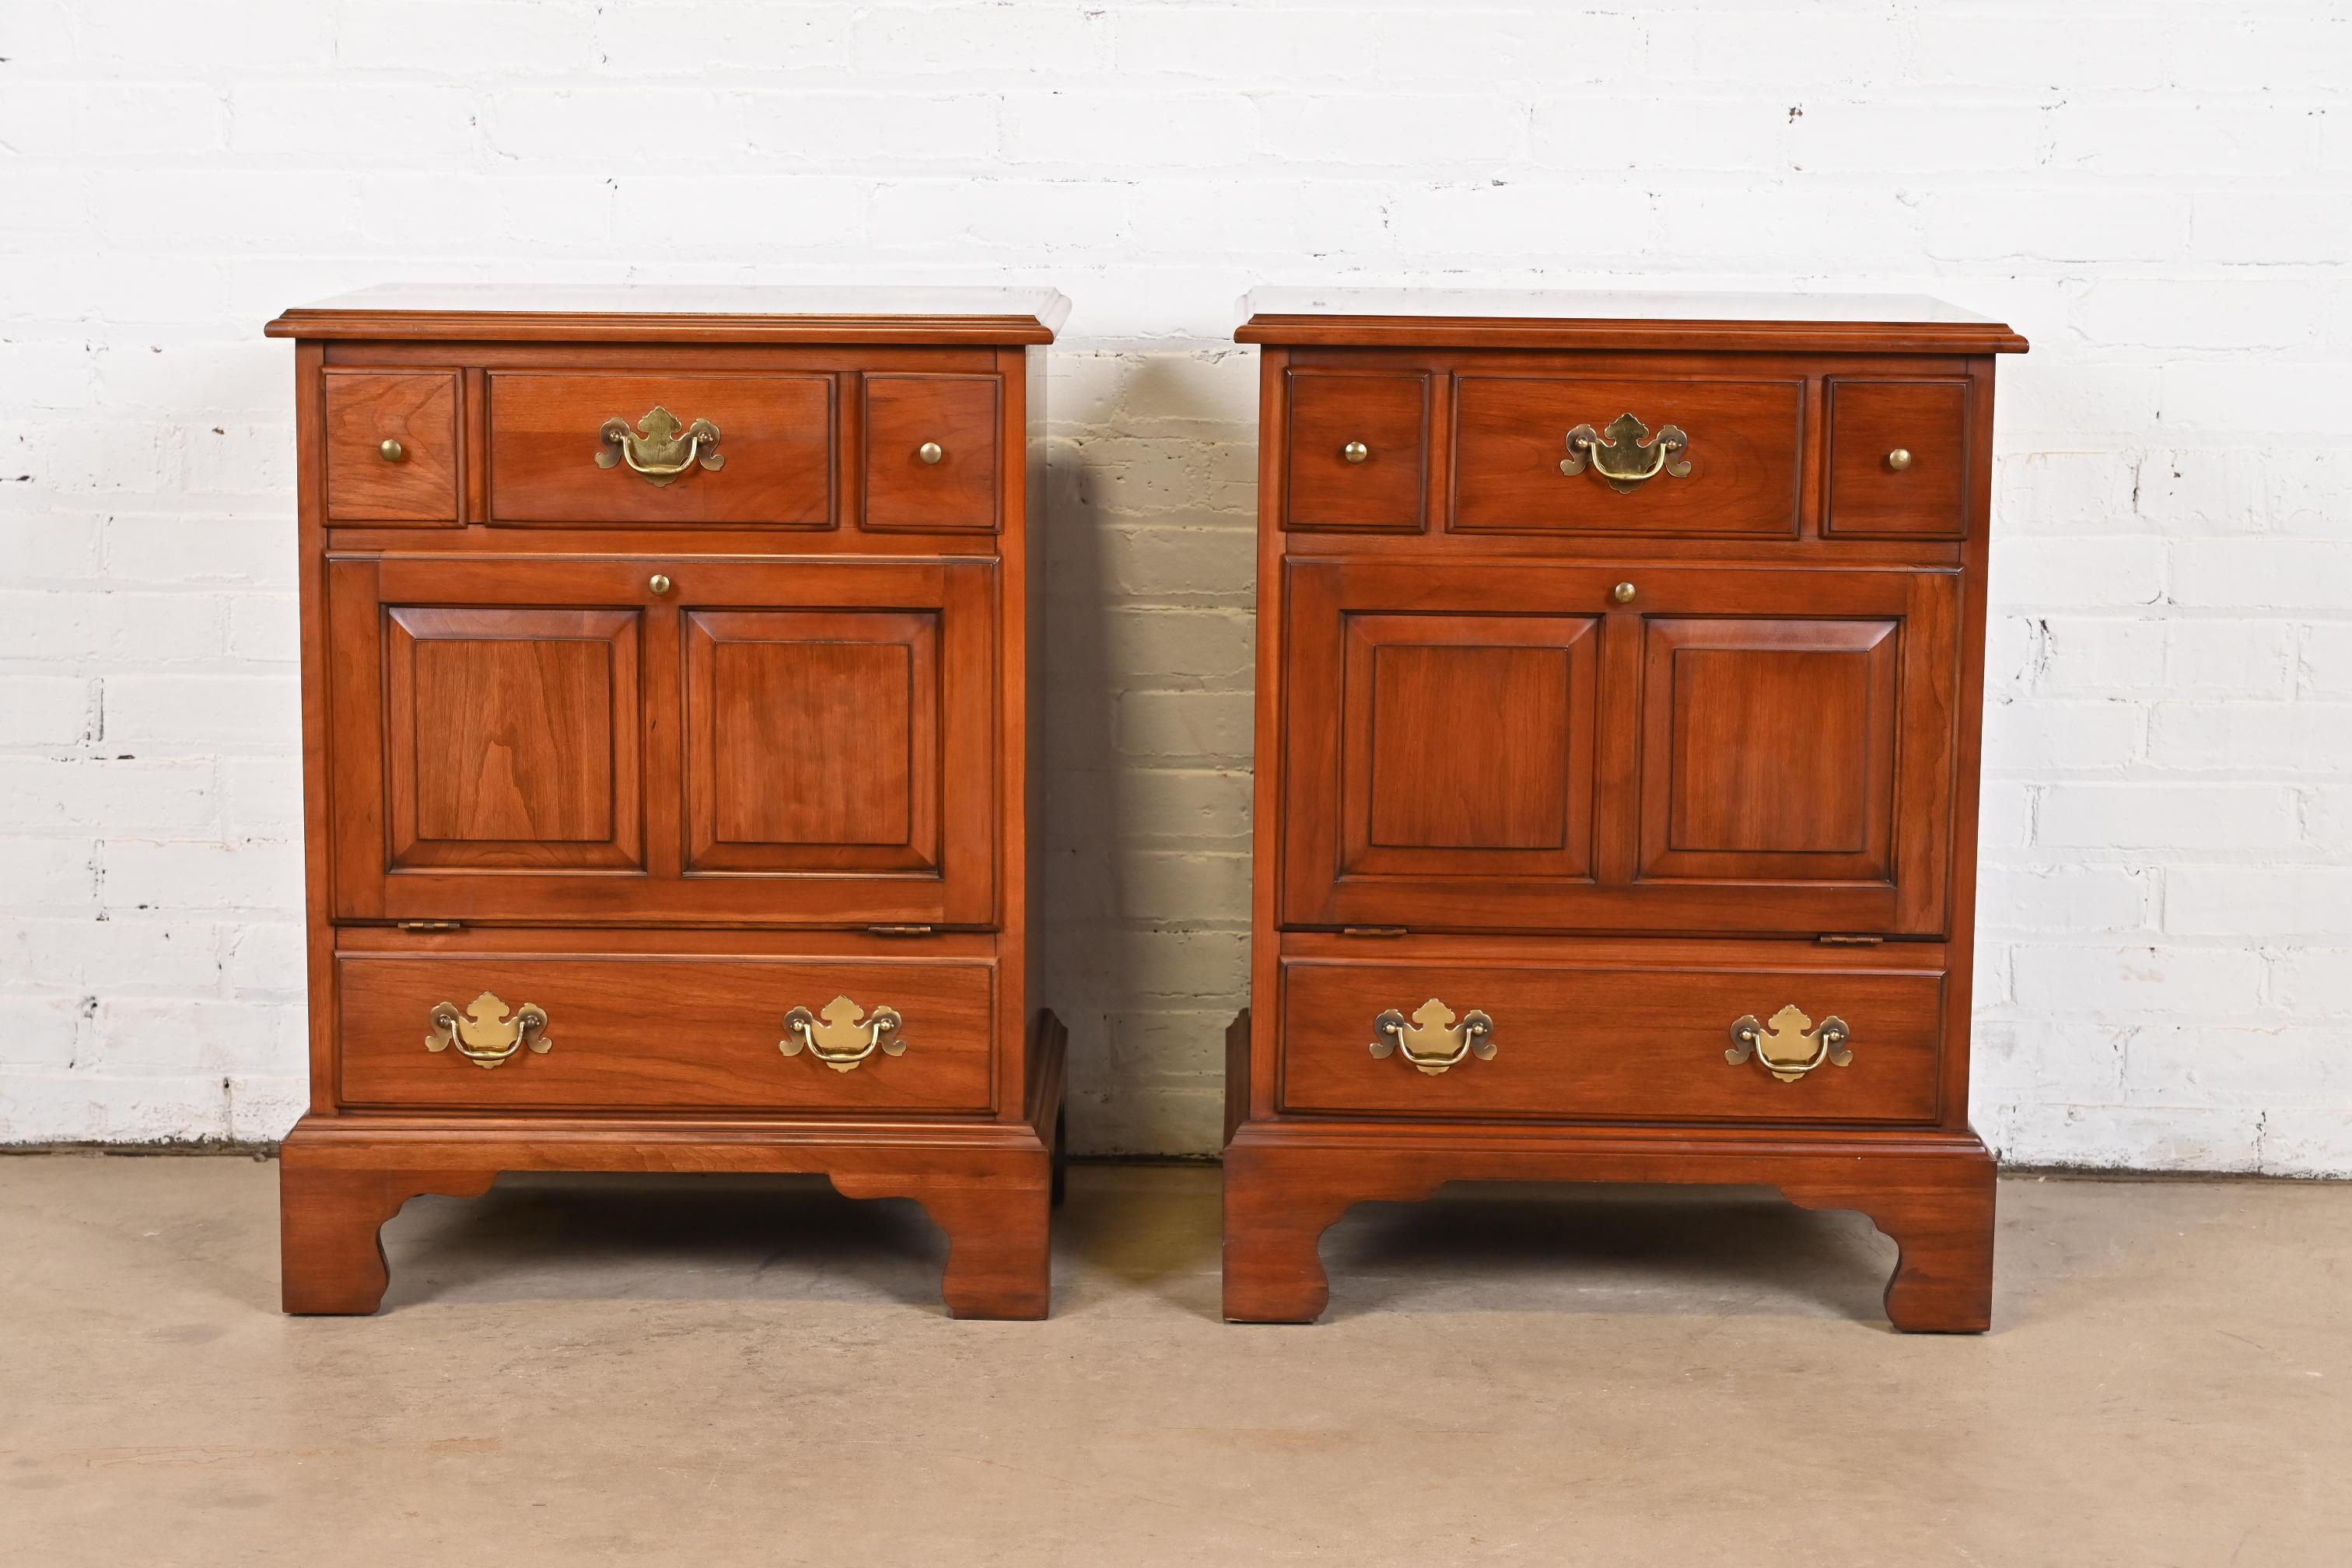 A gorgeous pair of American Colonial, Chippendale, or Georgian style nightstands

By Henkel Harris

USA, 1975

Solid carved cherry wood, with original brass hardware.

Measures: 22